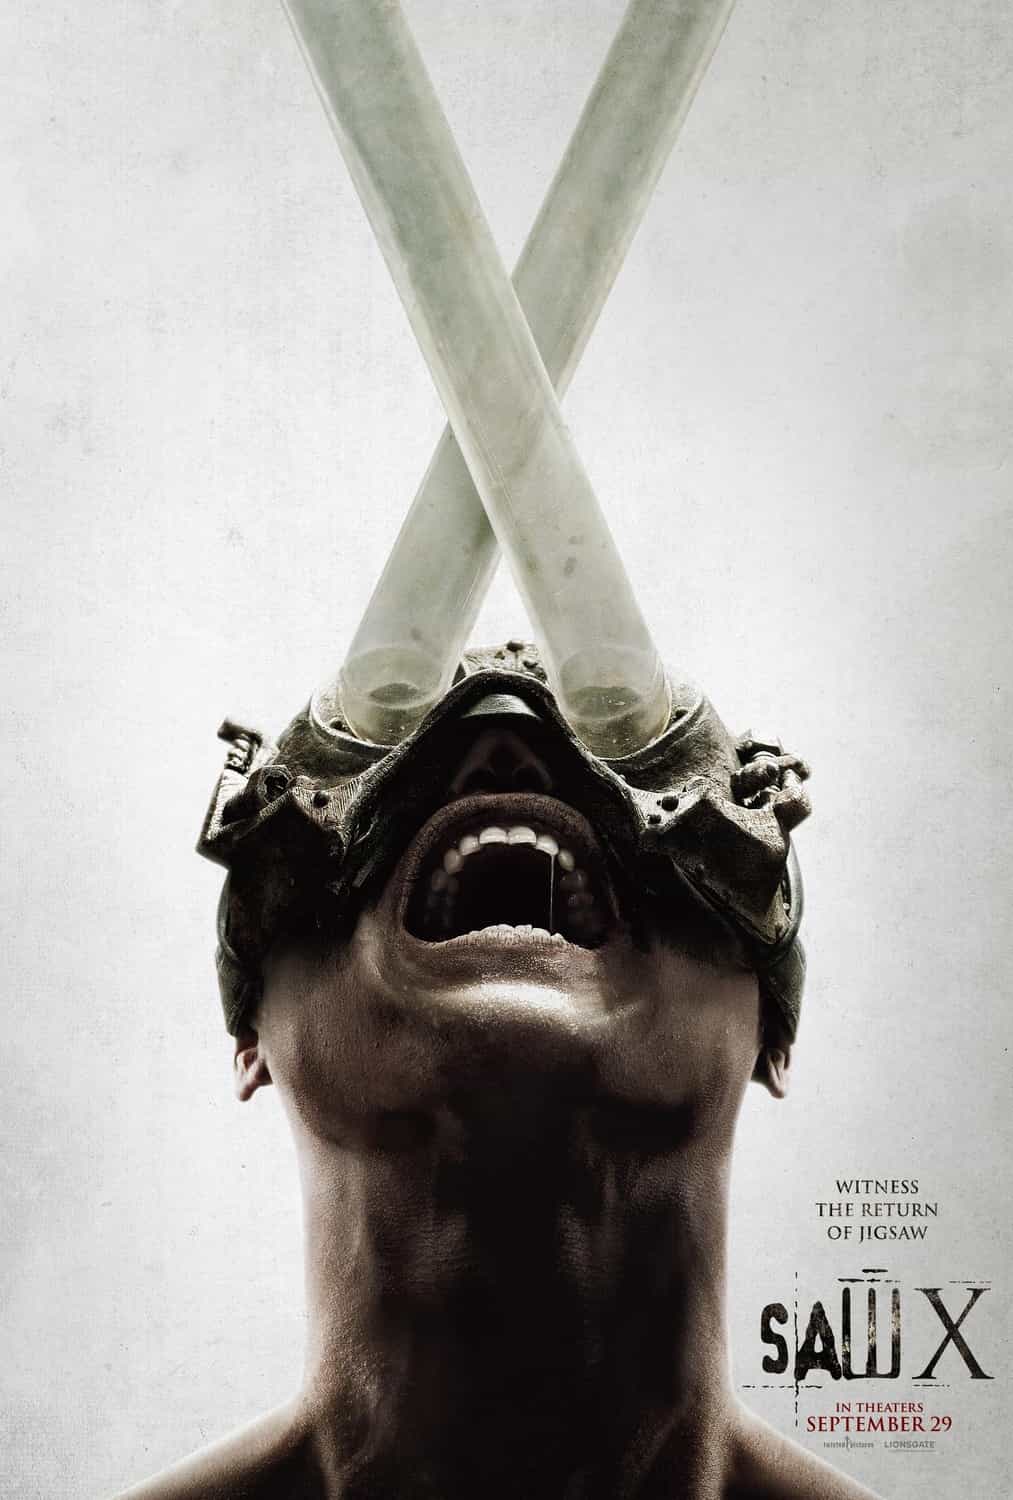 New poster has been released for Saw X which stars Michael Beach and Tobin Bell - movie UK release date 27th October 2023 #sawx